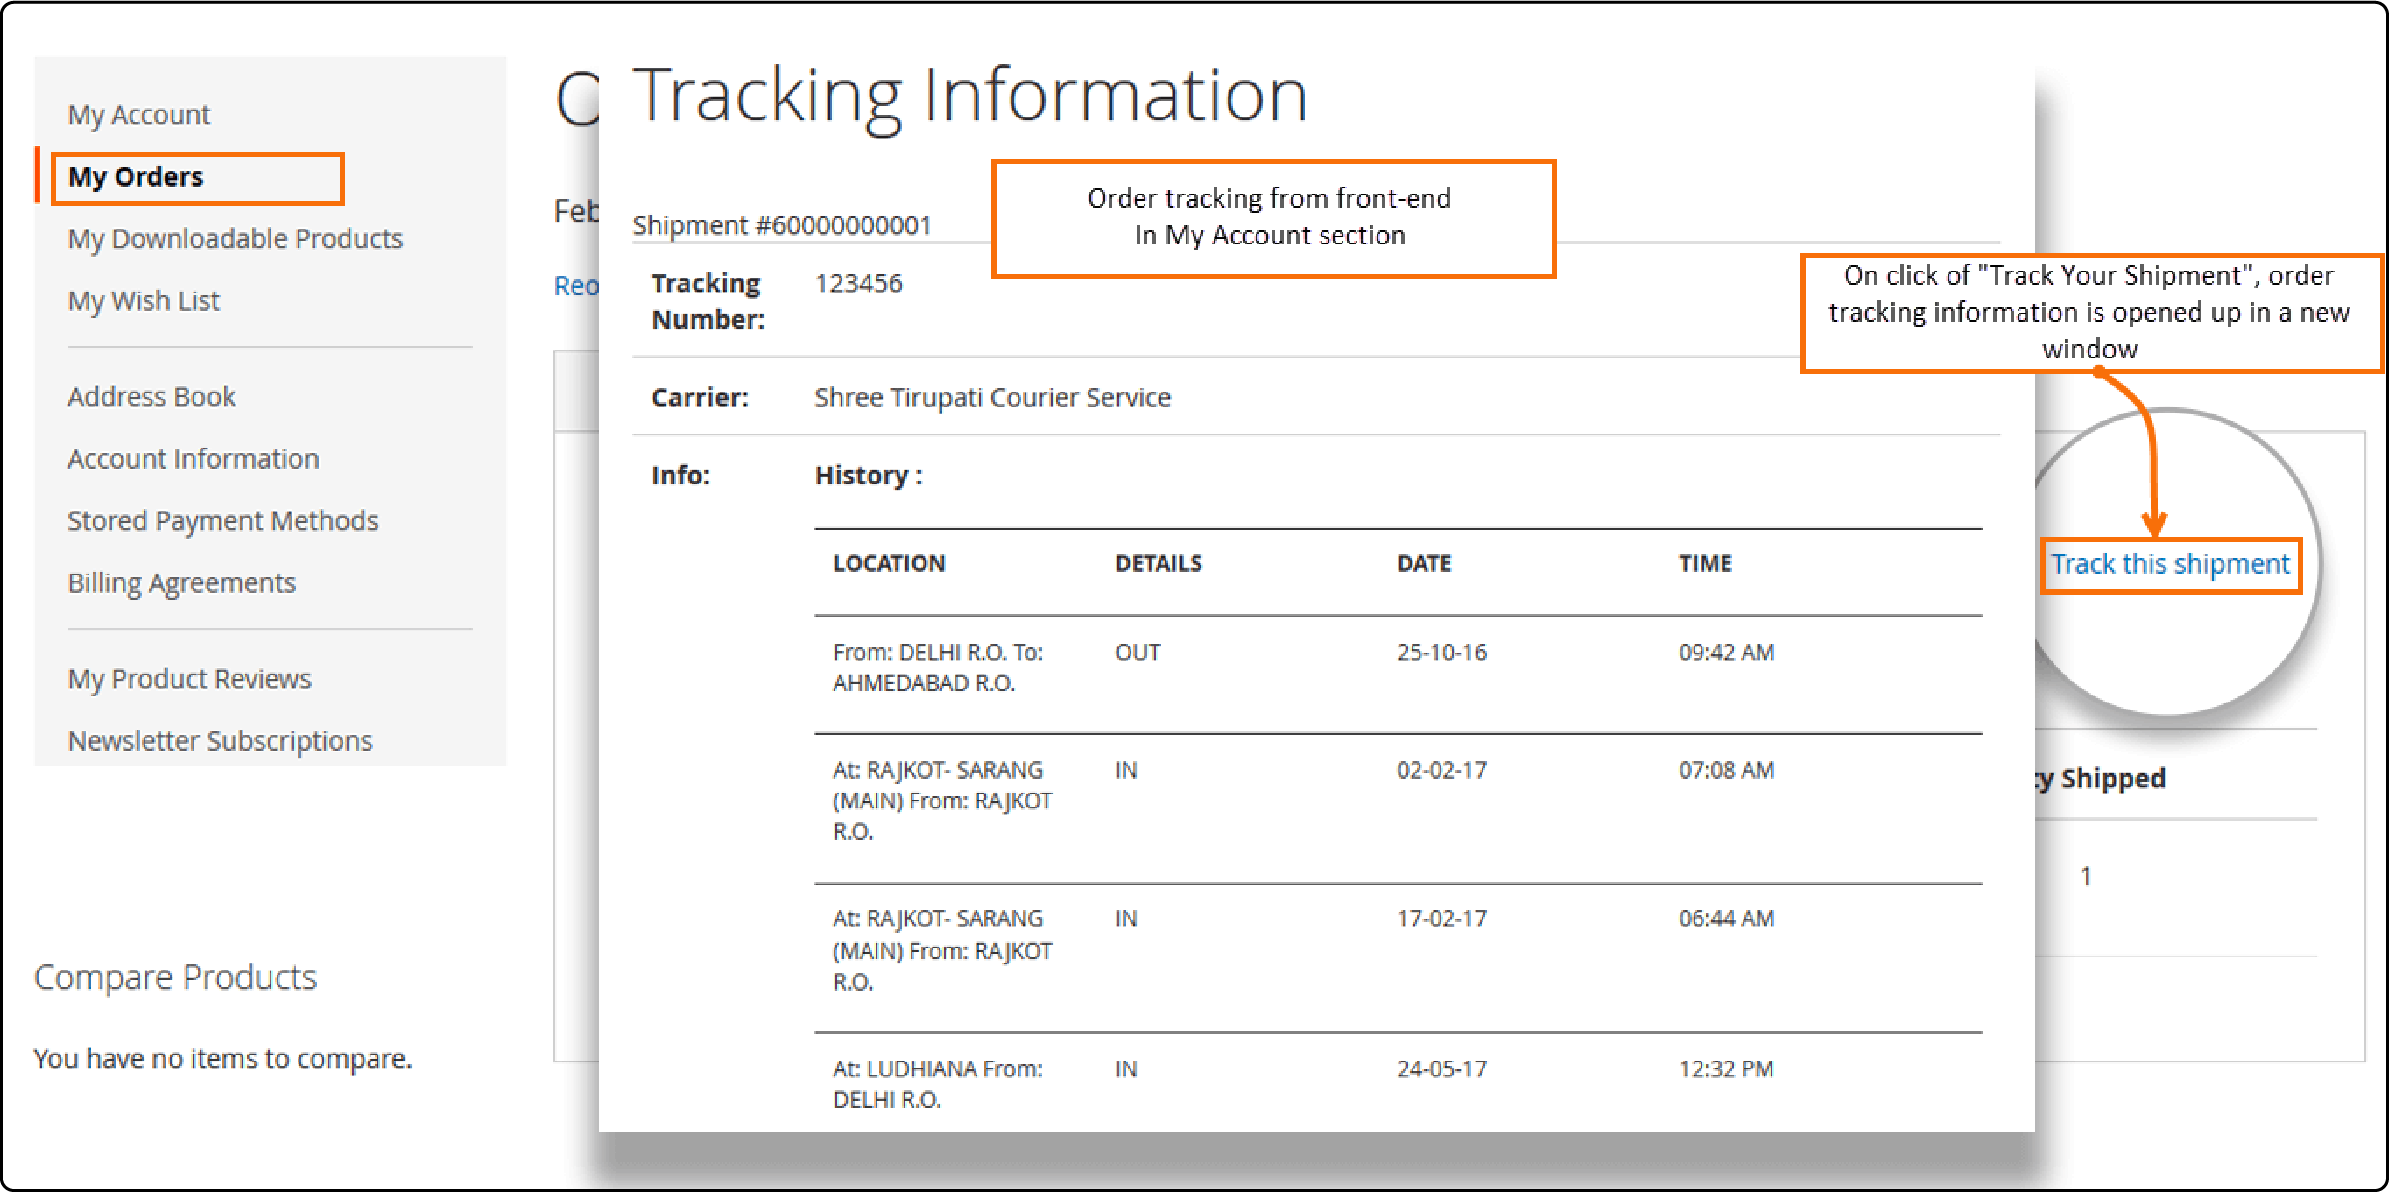 Customer's perspective of order tracking using Magento 2's frontend interface